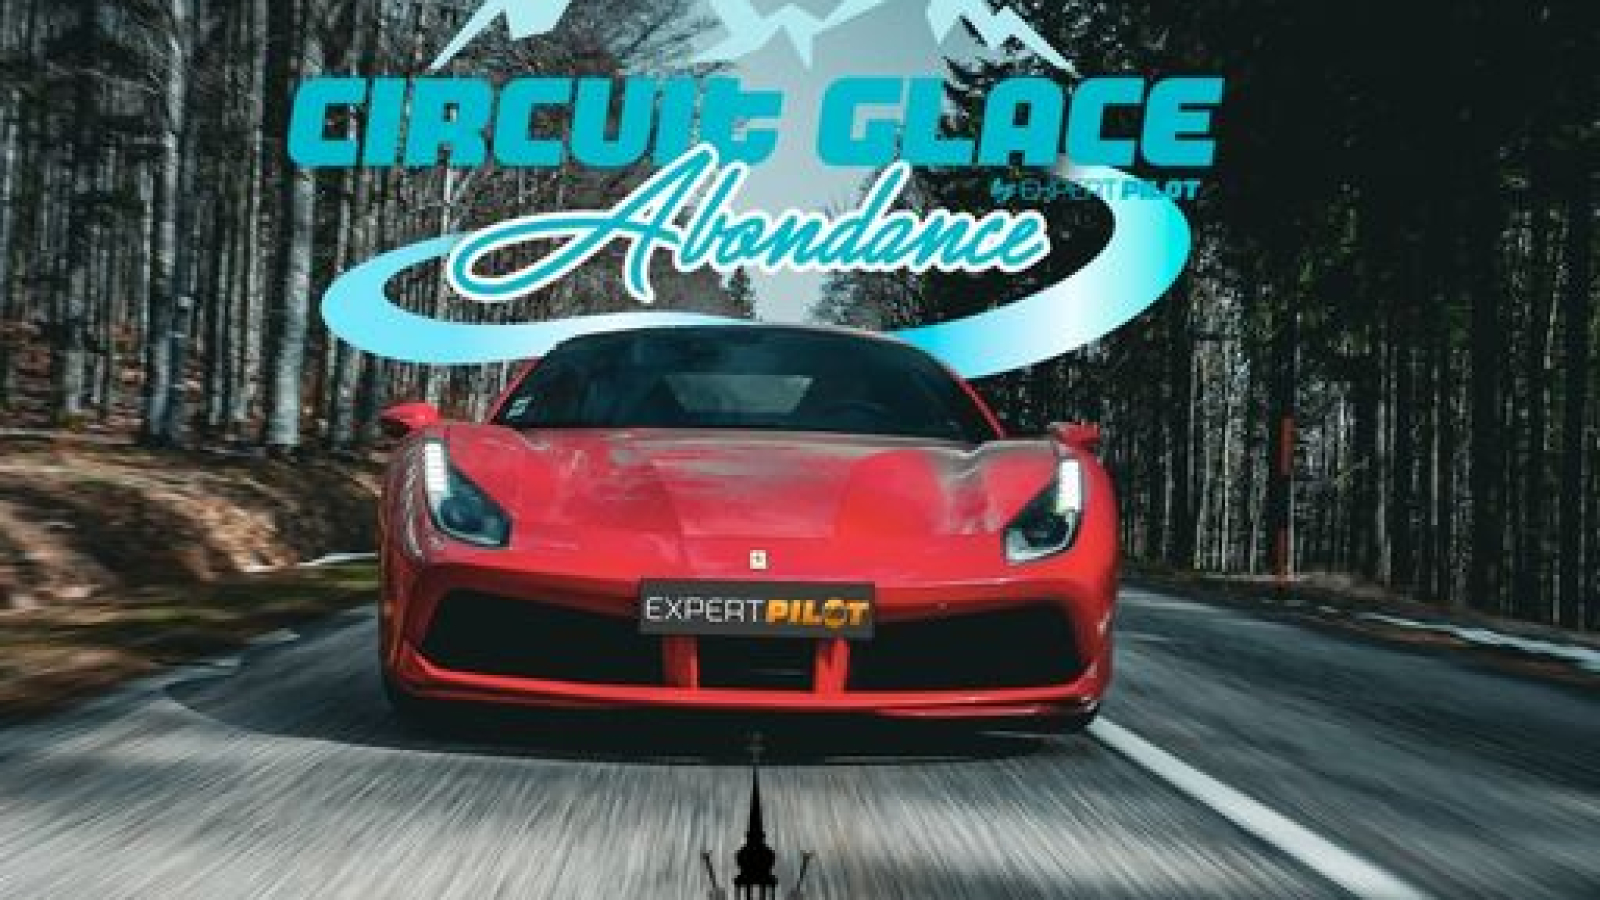 Driving course with Circuit glace Abondance